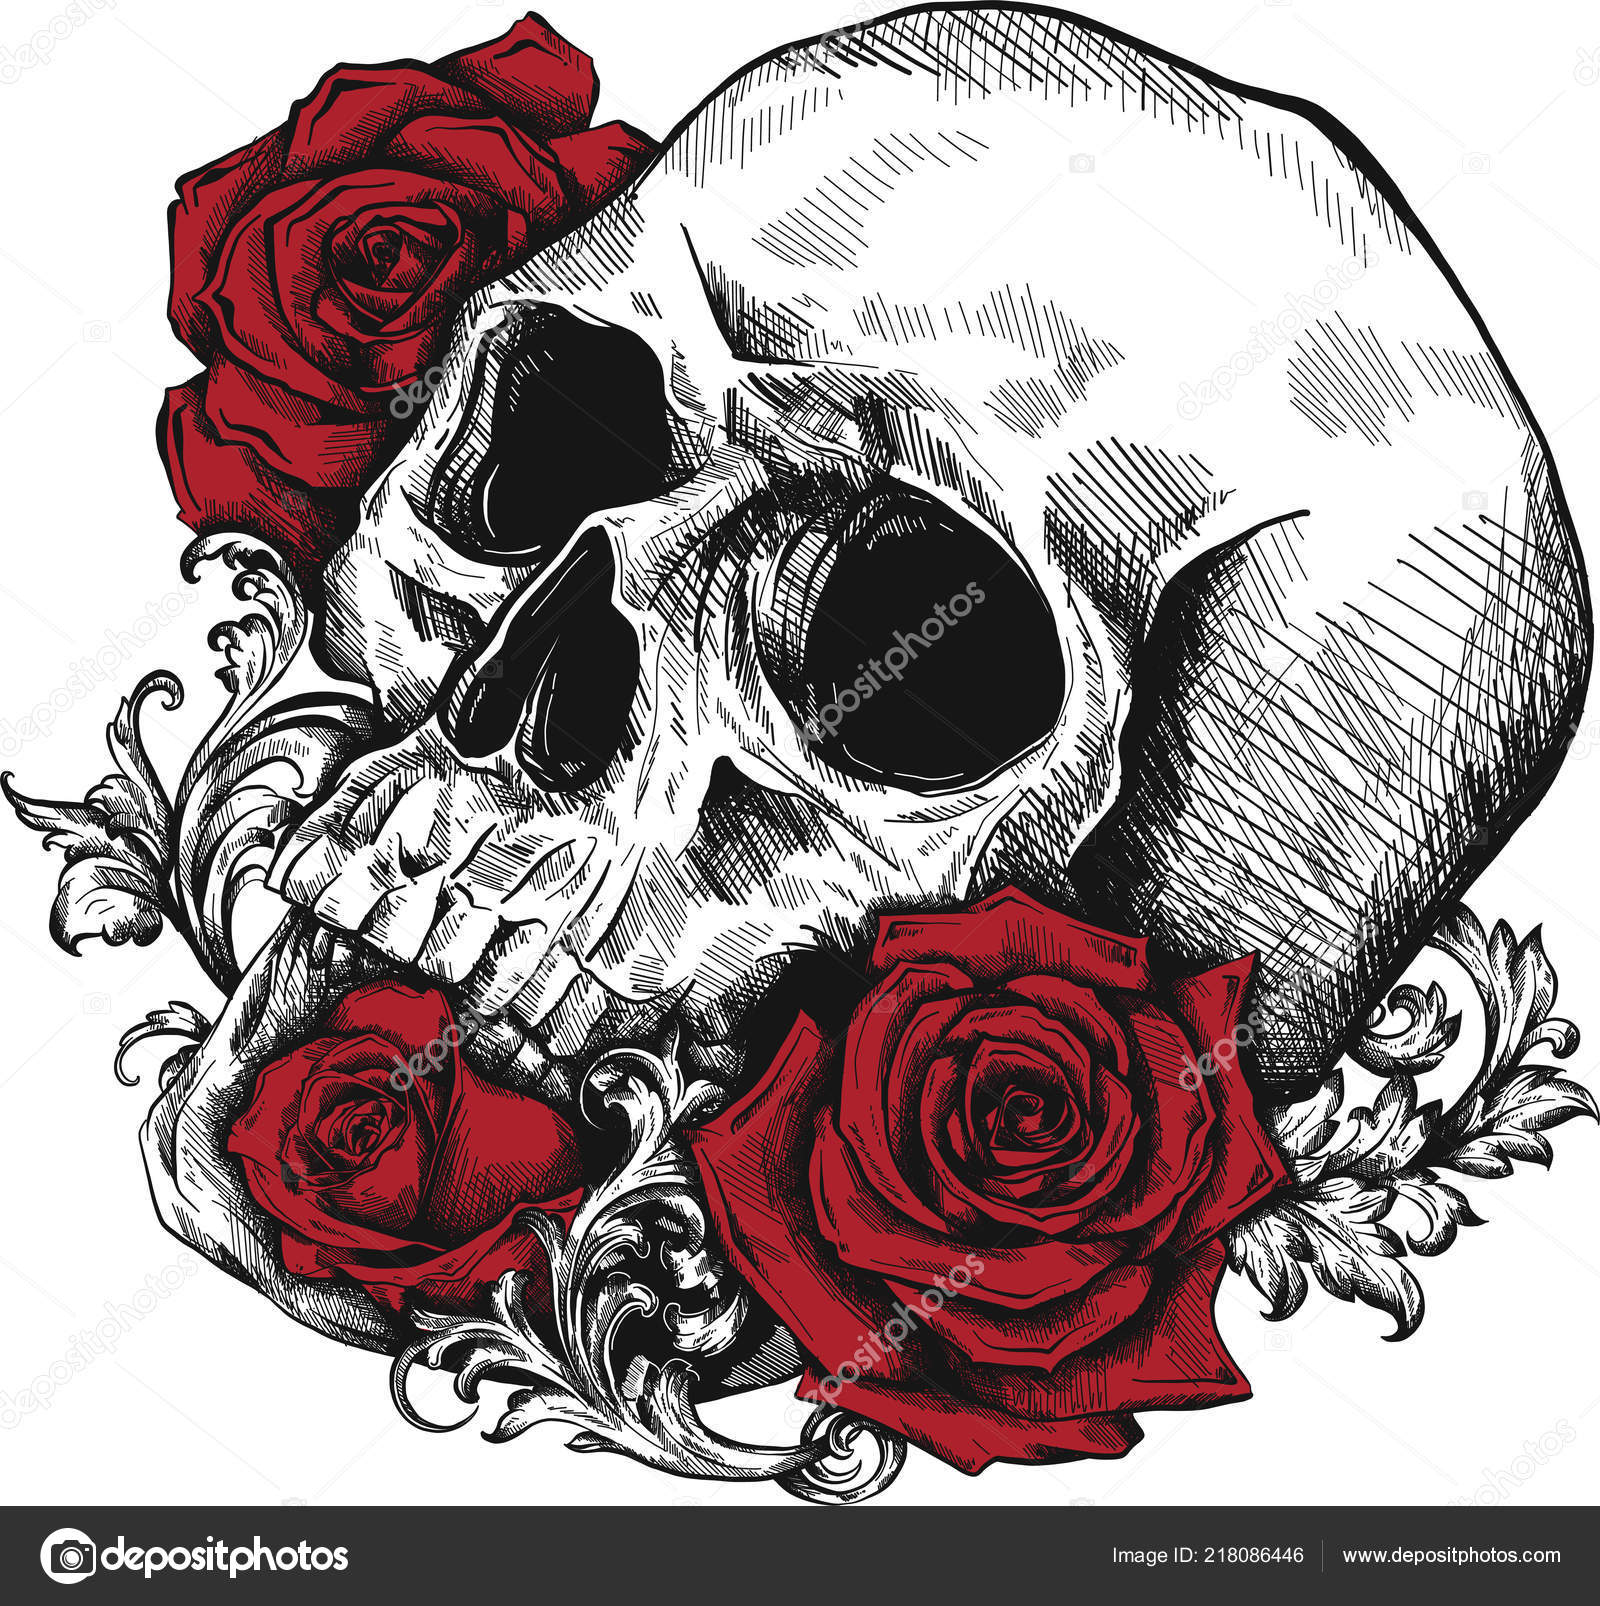 Skull and roses Stock Photos, Royalty Free Skull and roses Images |  Depositphotos